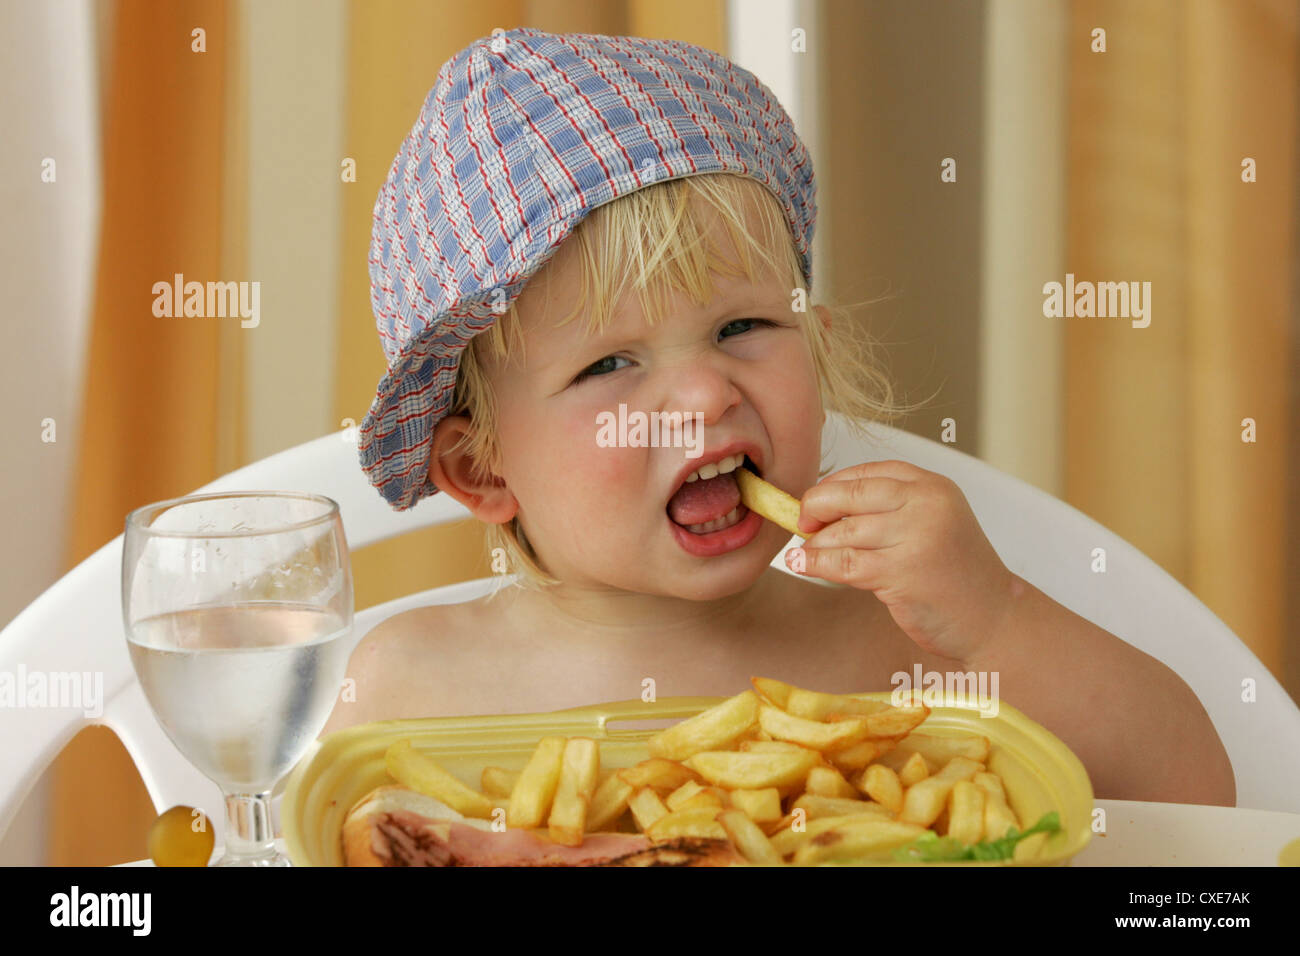 Pajara, a small child eating french fries Stock Photo